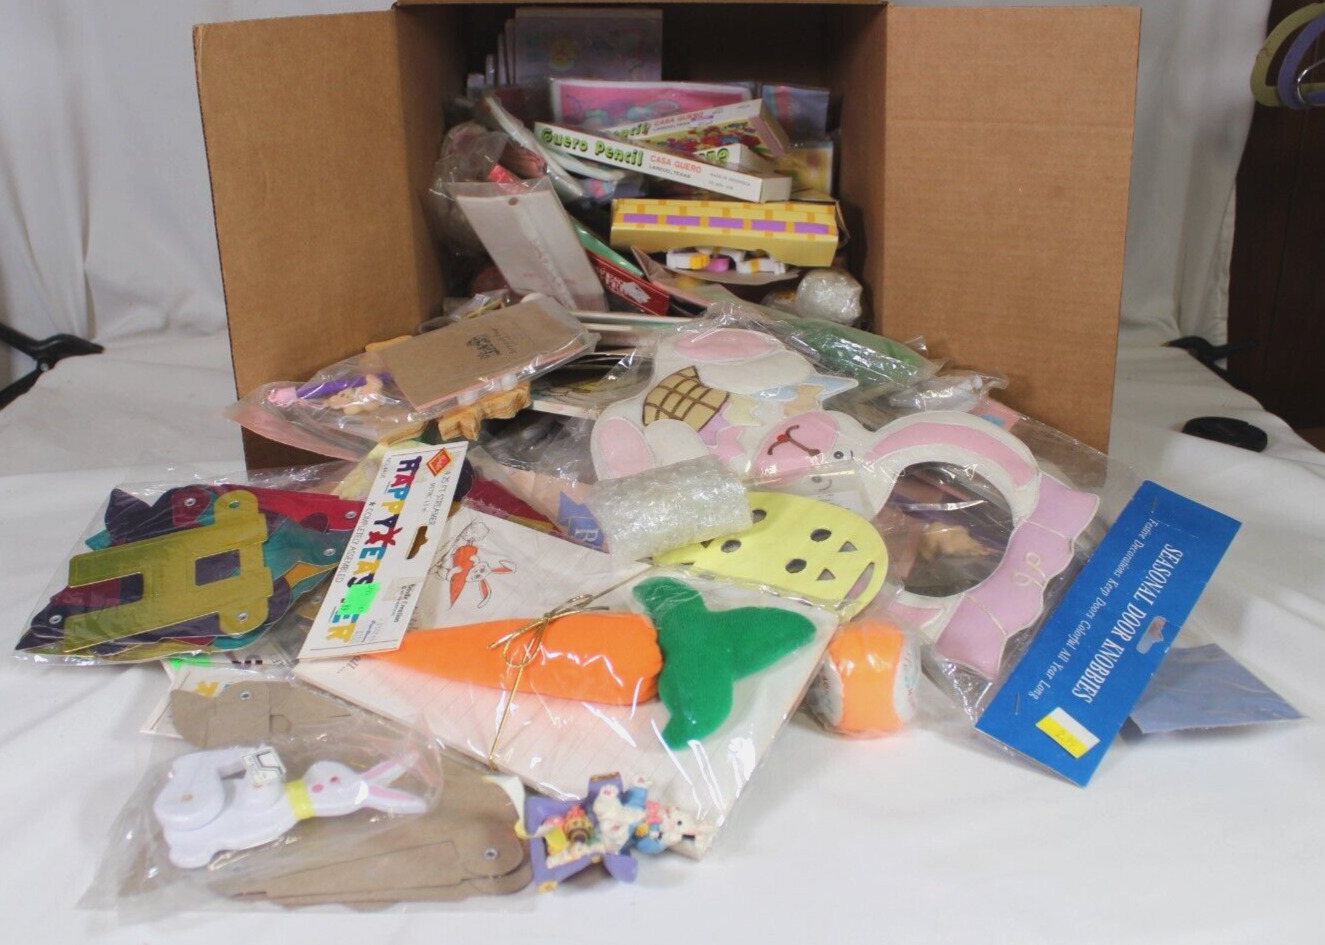 250+ VINTAGE Mixed Lot Of Easter, Paper, Books, Pencils, Figurines, Party Favors